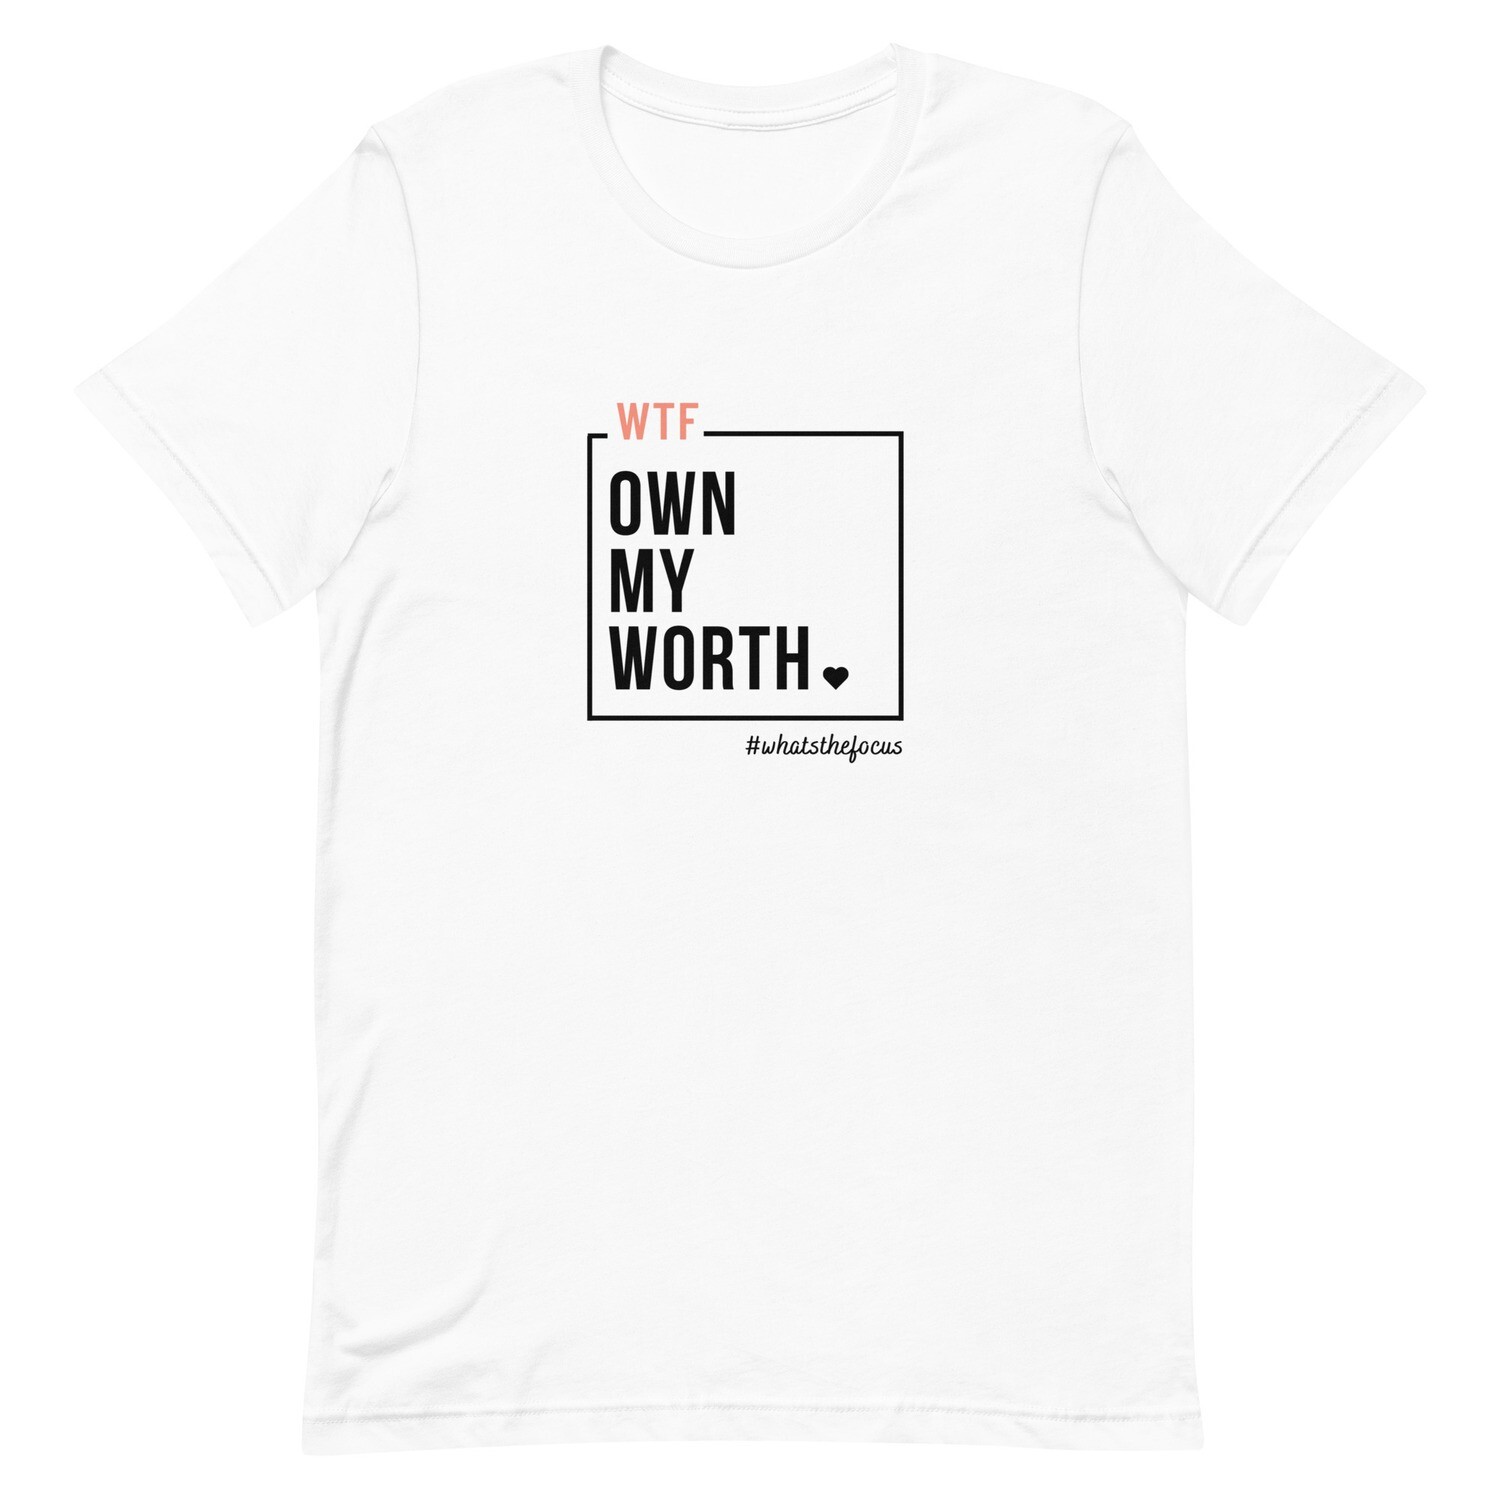 Own My Worth - White & Coral Unisex Tee